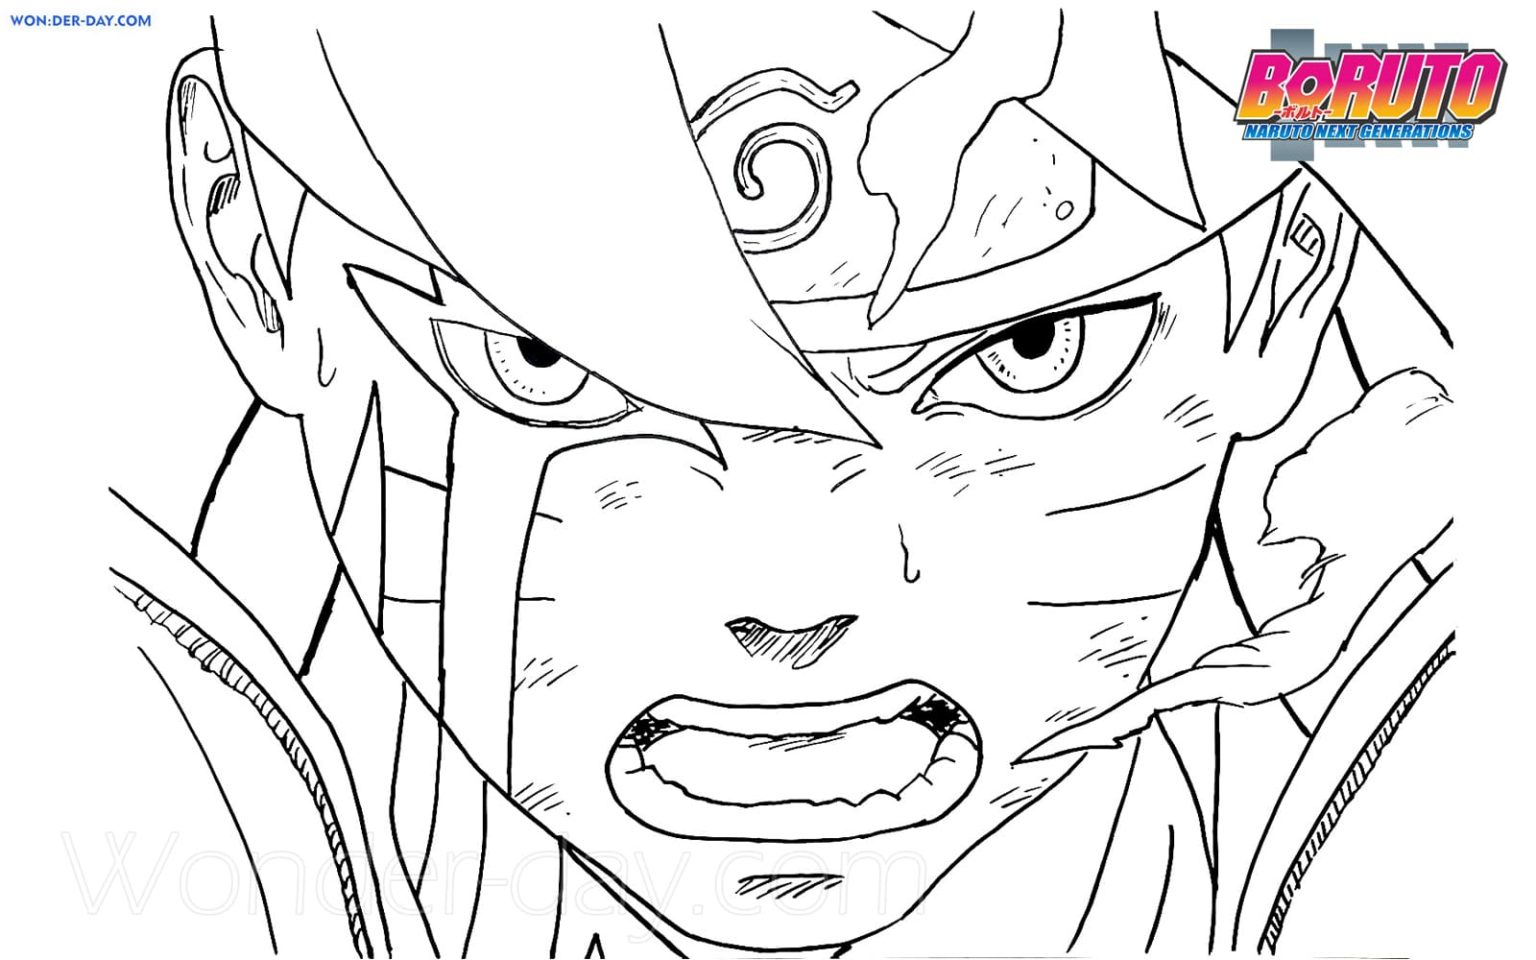 Boruto Coloring Pages - Print And Color | Wonder Day — Coloring Pages avec Coloriage De Boruto